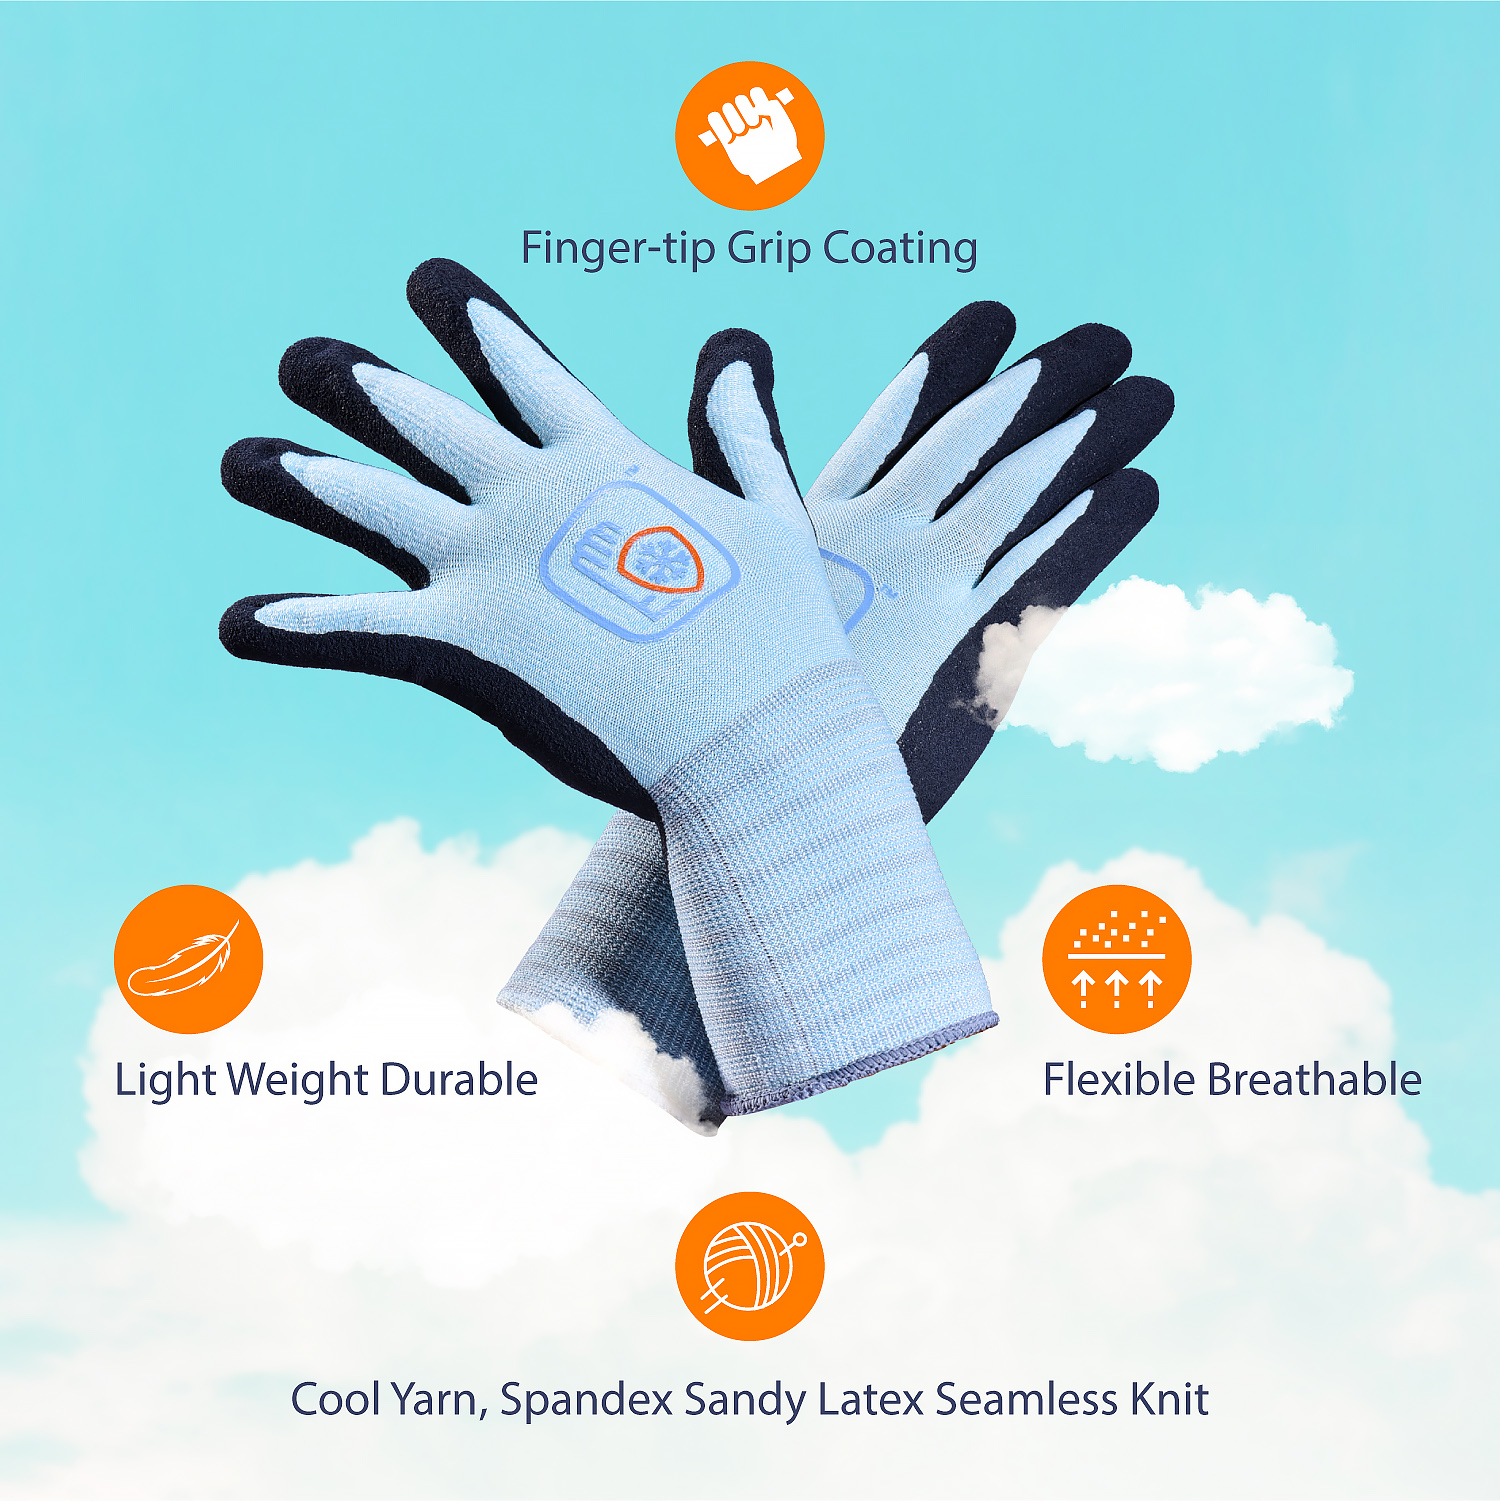 SAFEYEAR 12 Pairs Safety Gloves Work Gloves With Natural Latex Coated, Gardening and Builders Gloves Waterproof and Anti-Slip